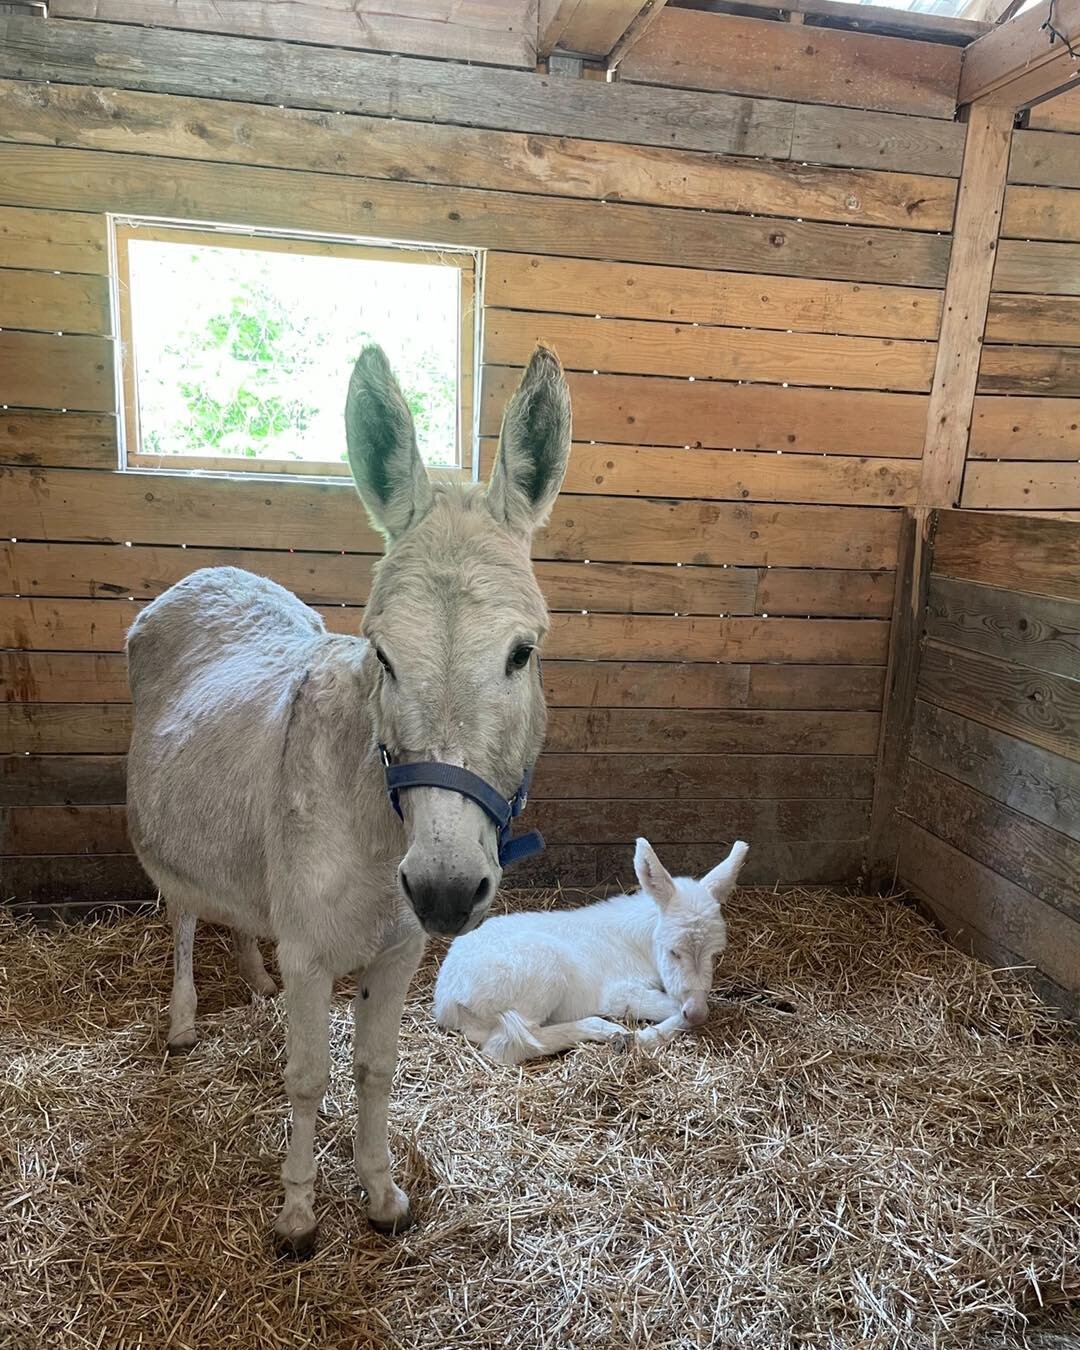 It&rsquo;s Foal Friday! And we just had to post about this little filly. Here&rsquo;s Dr. Crigler performing a neonatal exam while also providing snuggles, a crucial part of the exam. She will check this baby from the tip of her nose to the bottom of